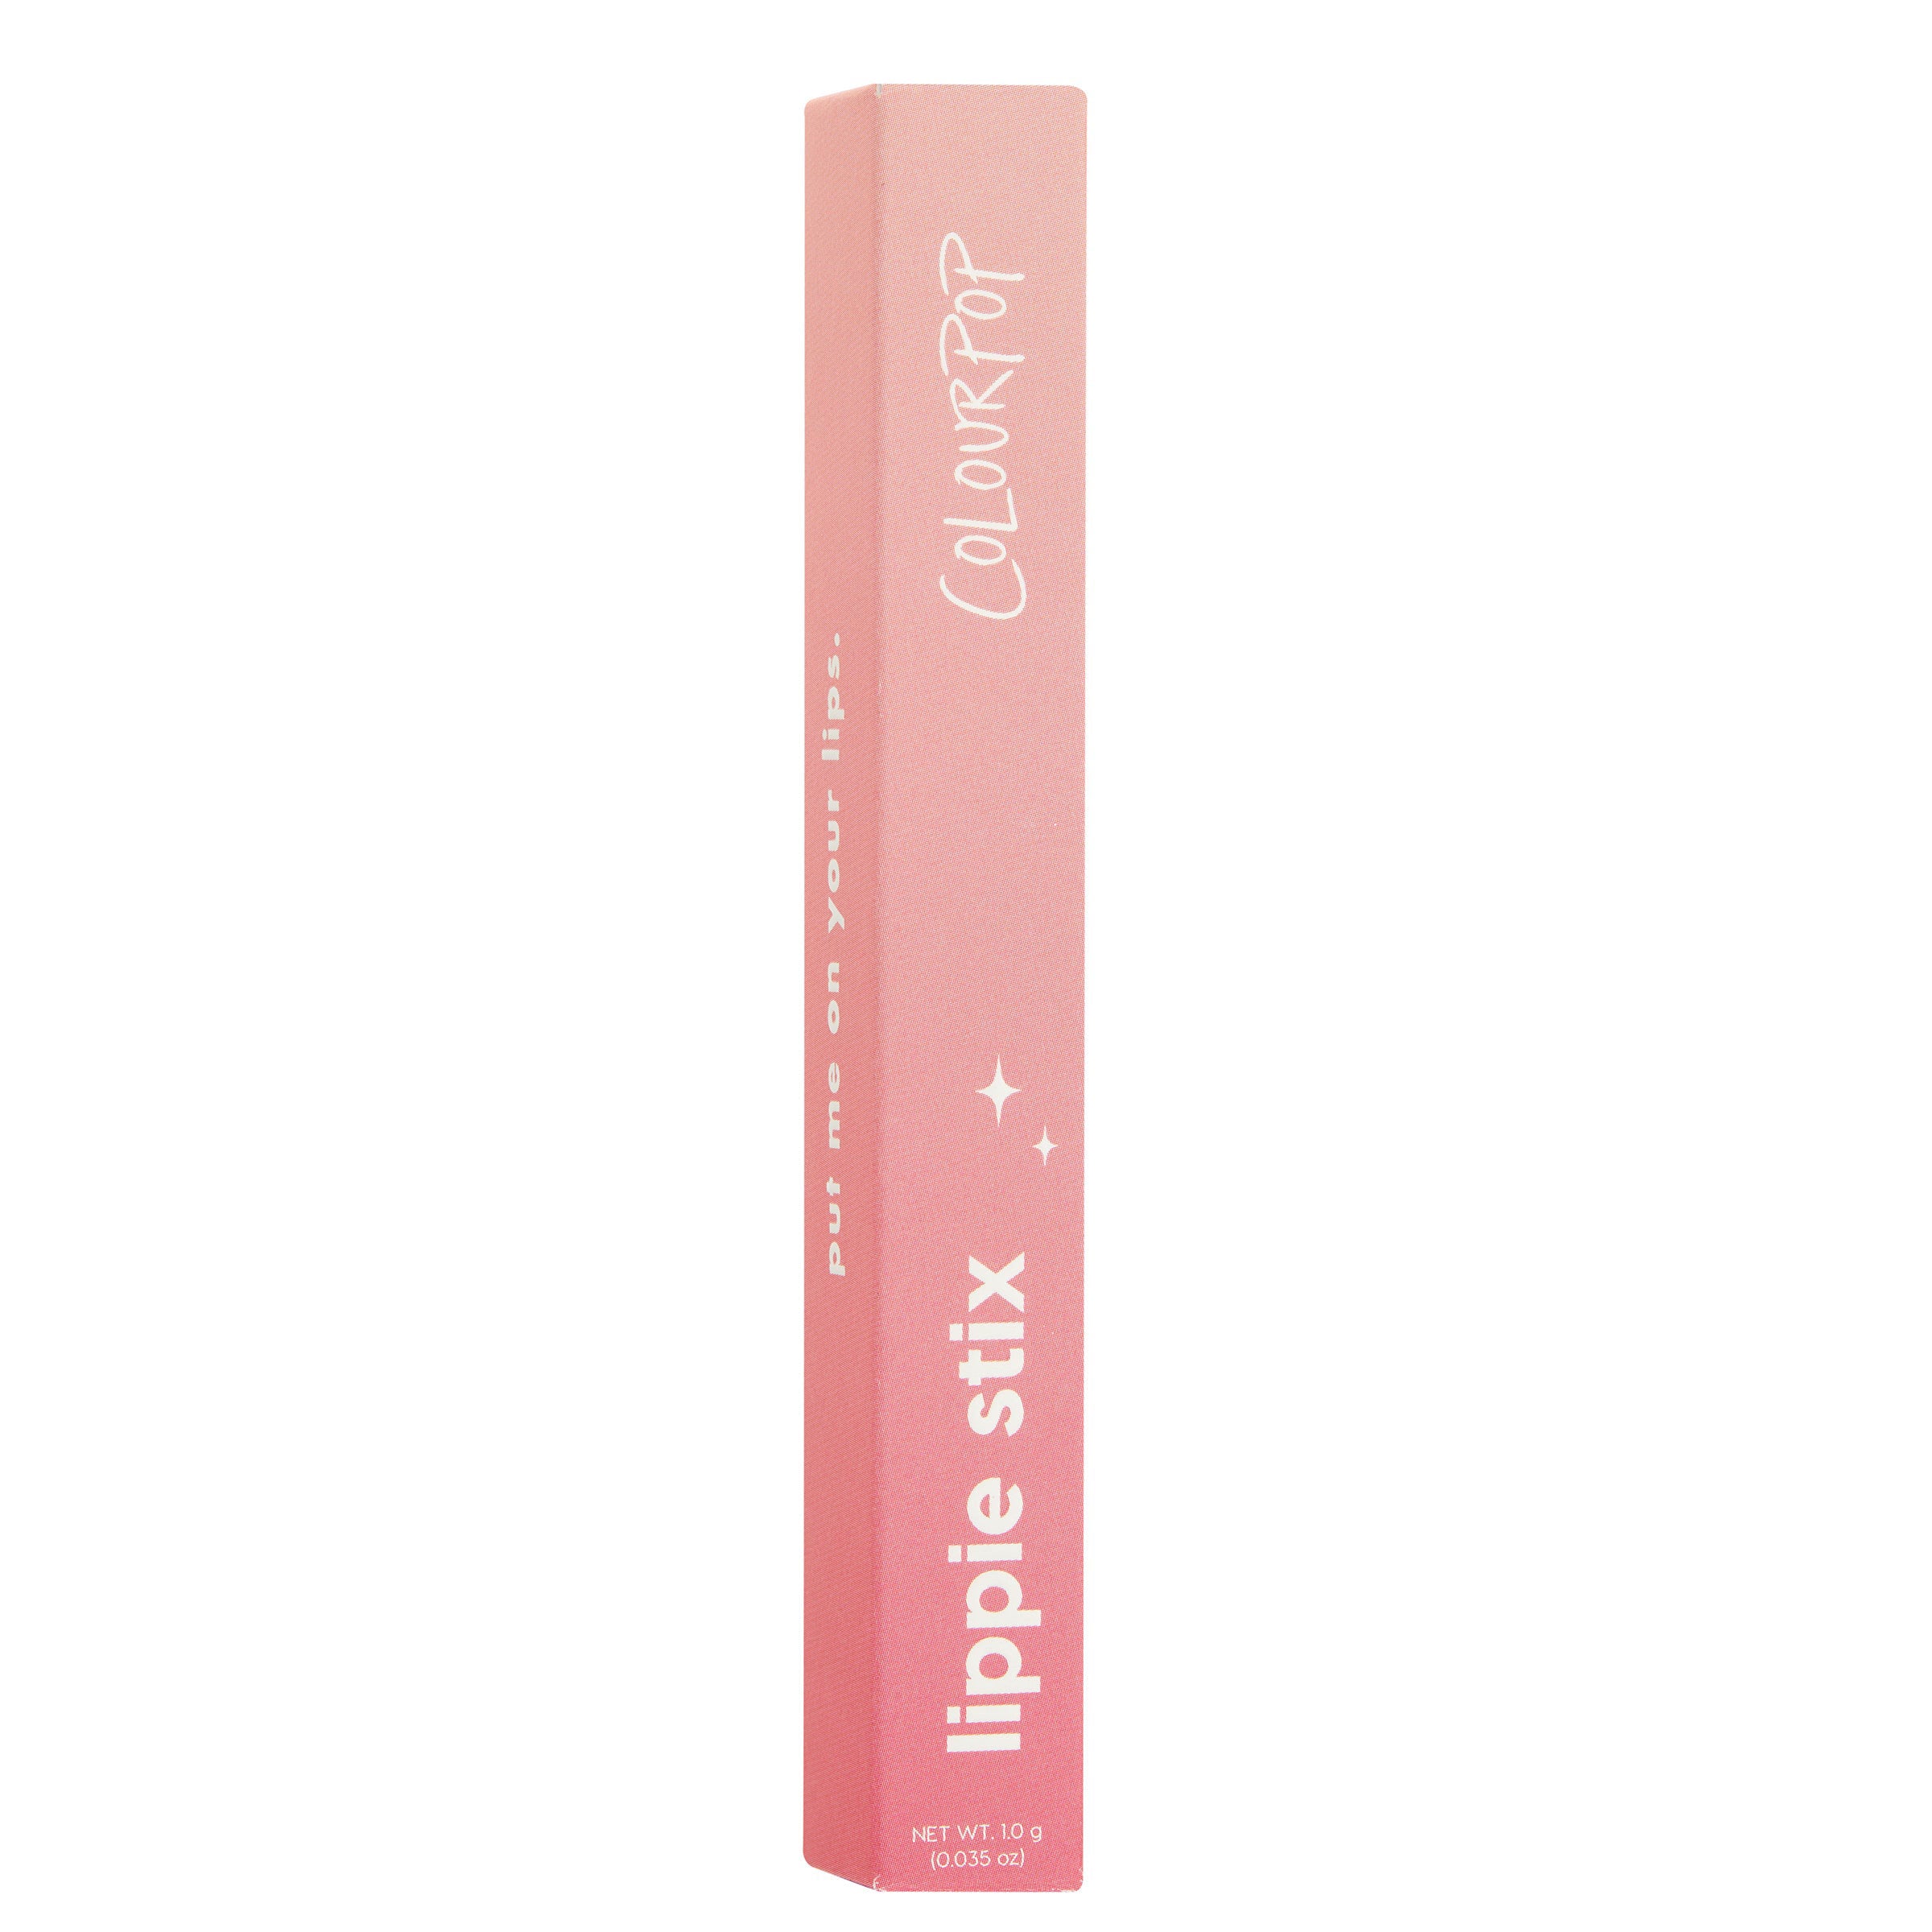 ColourPop Lippie Stix in Unreal, a nude mahogany hue packaging